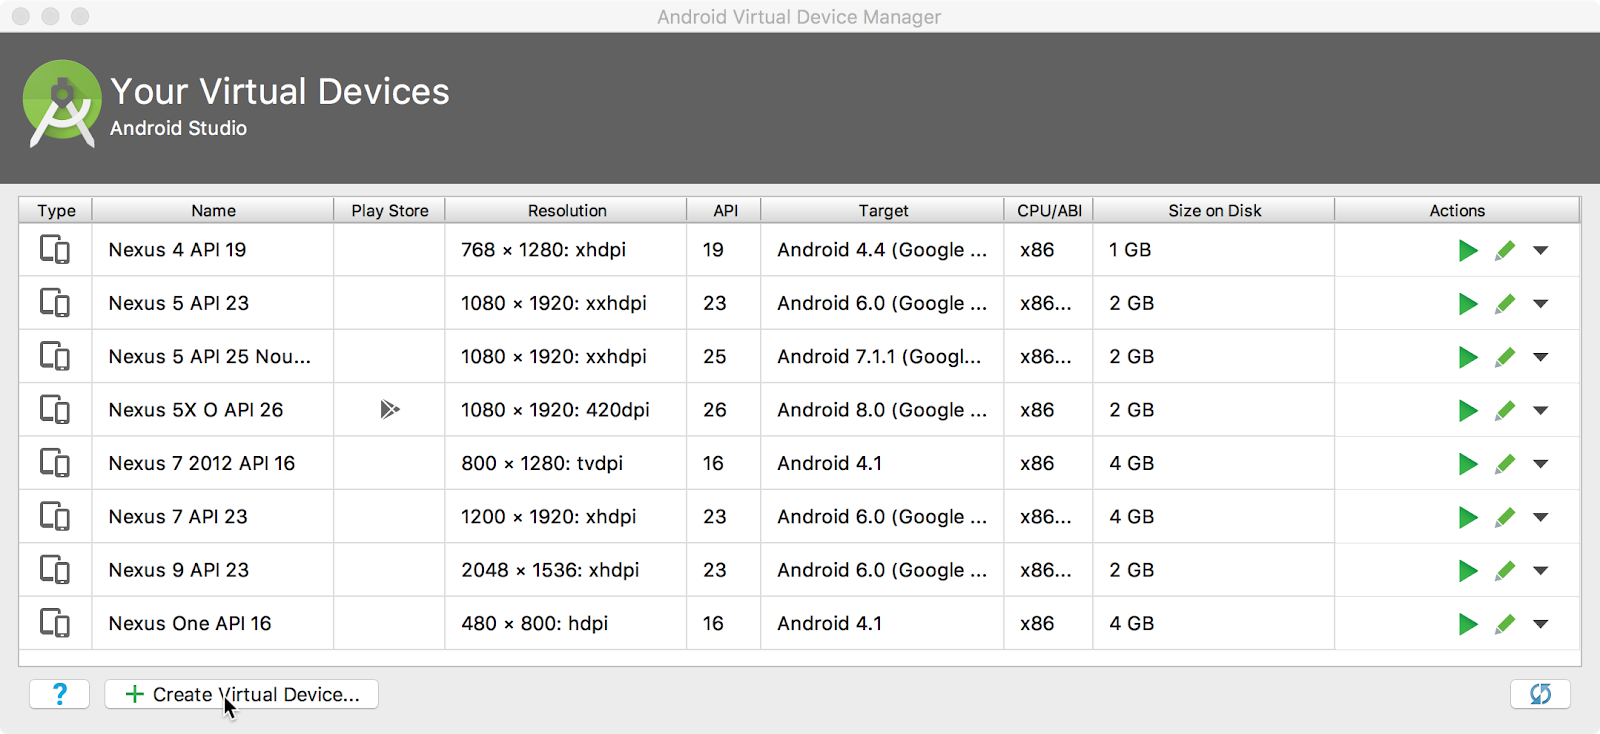  The Android Virtual Device (AVD) manager